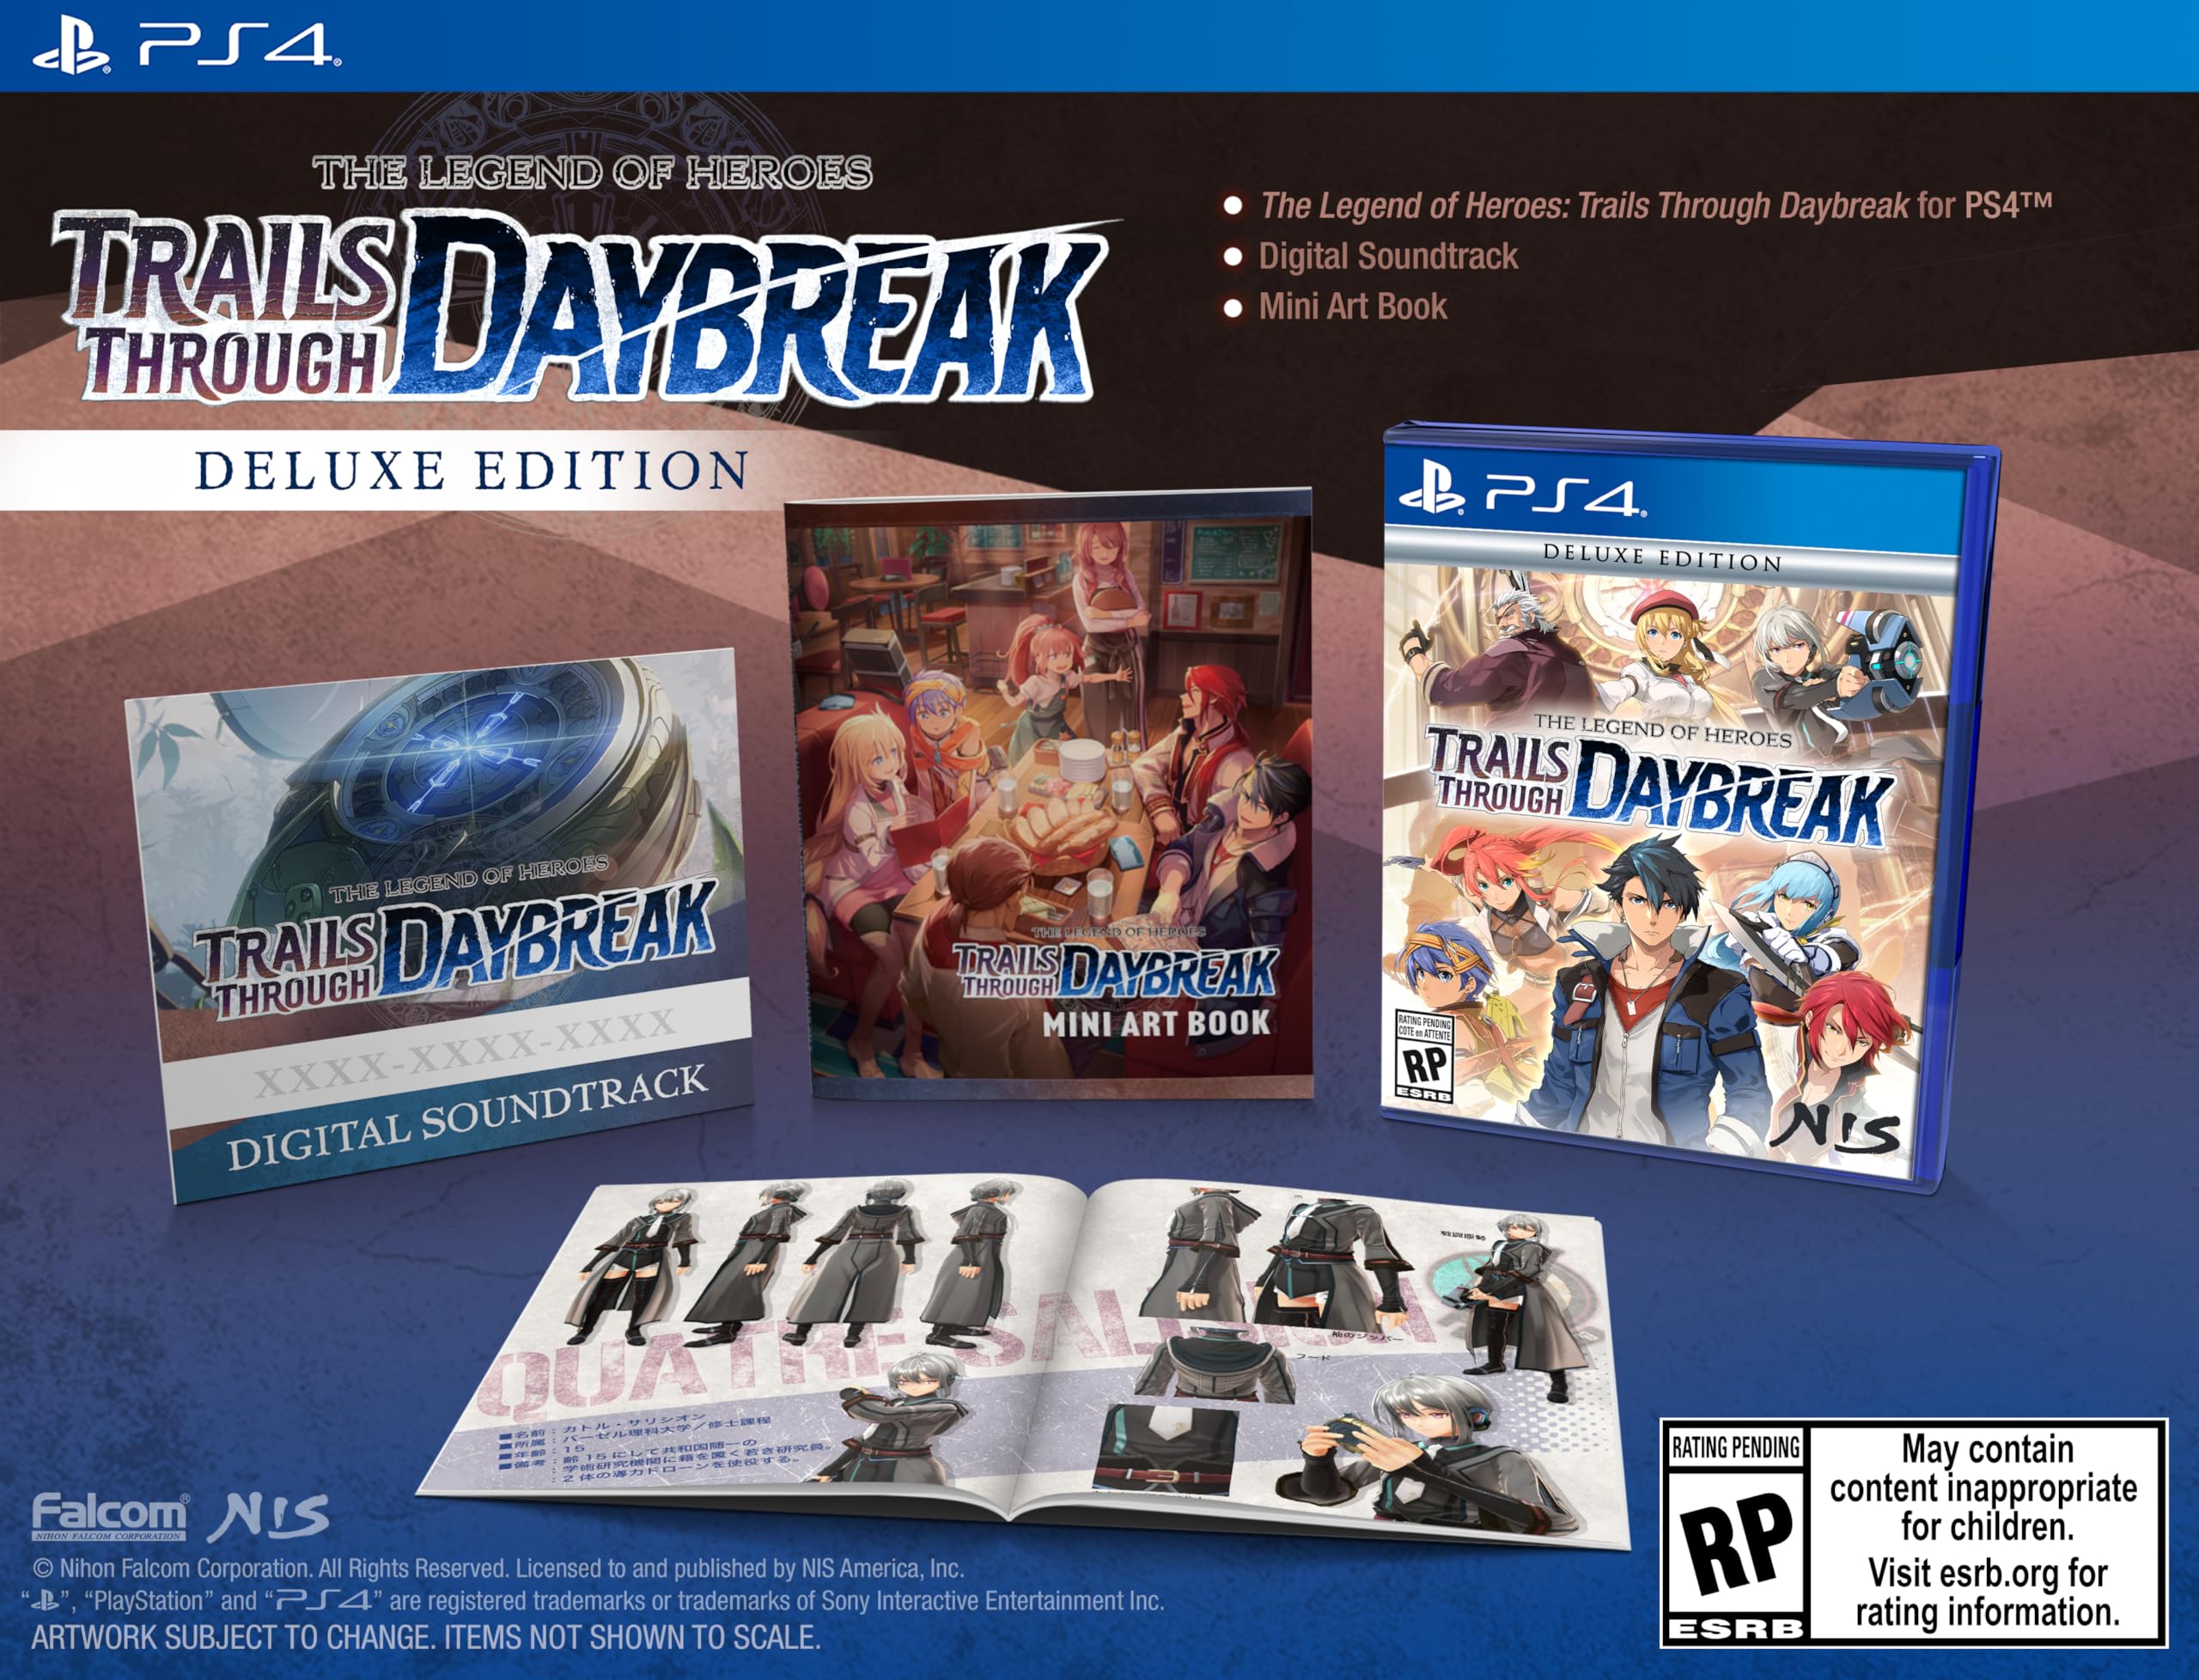 The Legend of Heroes: Trails through Daybreak: Deluxe Edition - PlayStation 4